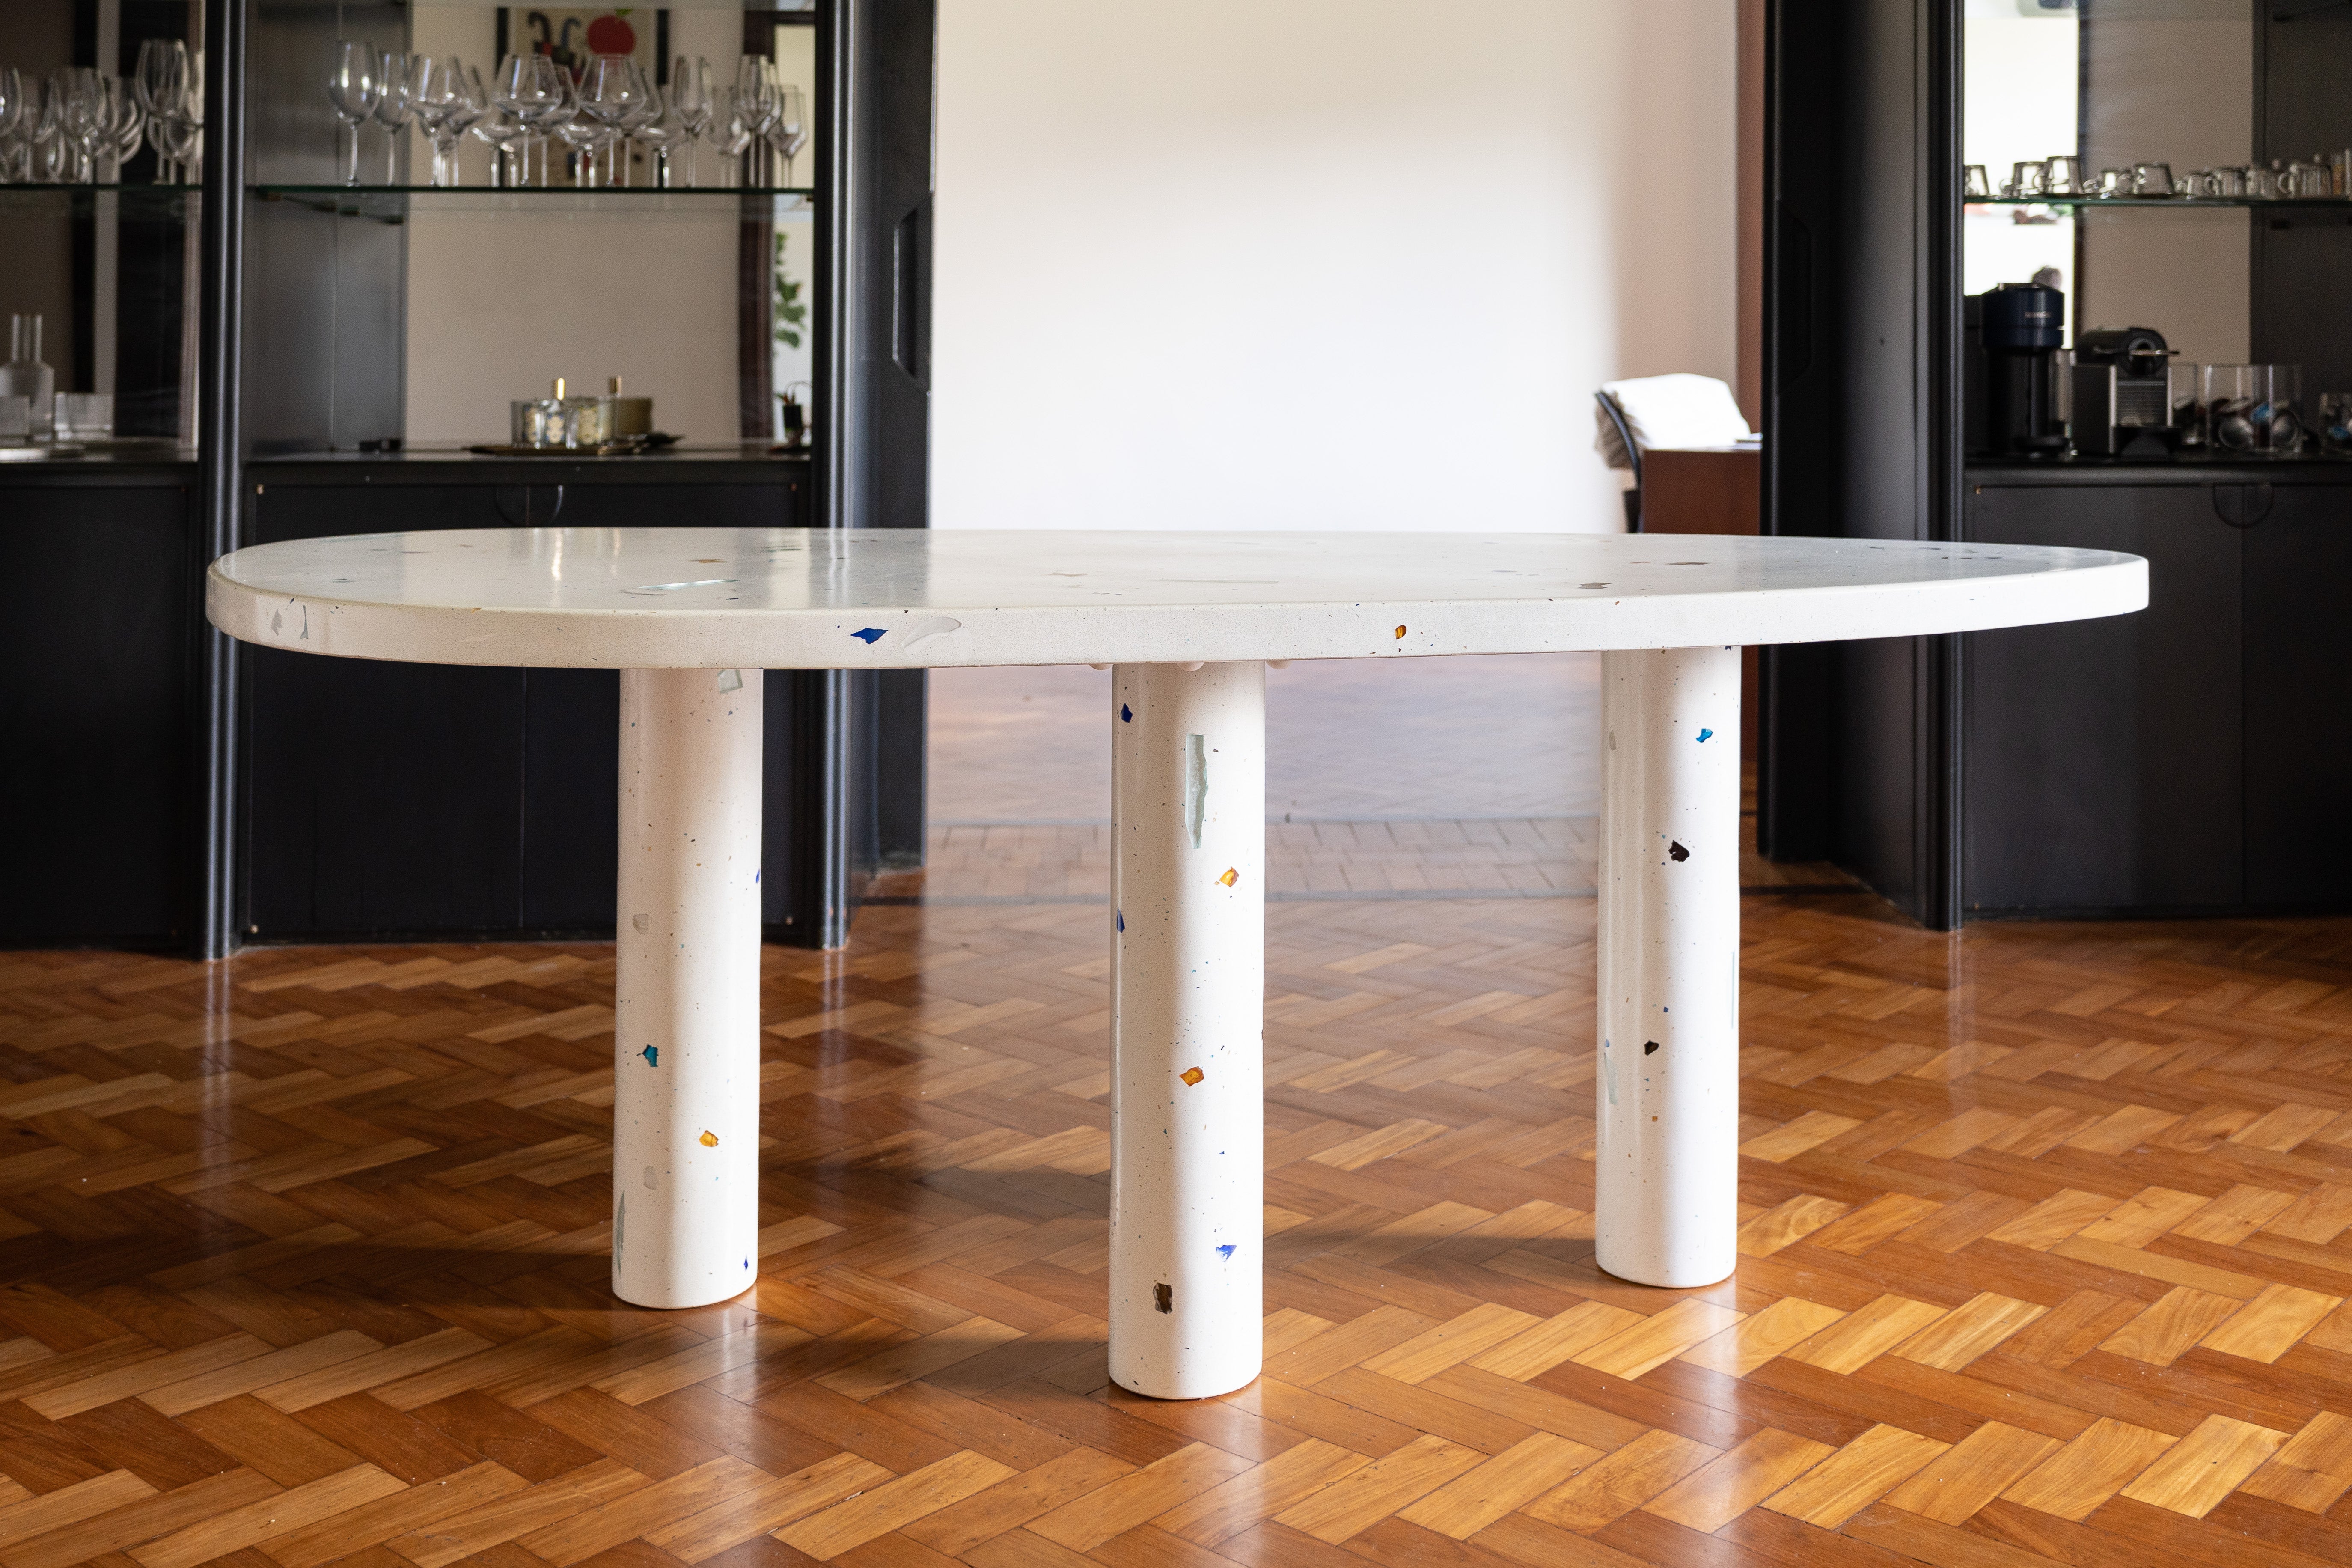 Mono Dining Table Long (8 seats):
The Mono Dining Table Long (8 seats) takes part of the MONOMORFO collection. It has an amorphous top with 2 possible variations of shape. The terrazzo composition is made of leftover glass crystals from a glass